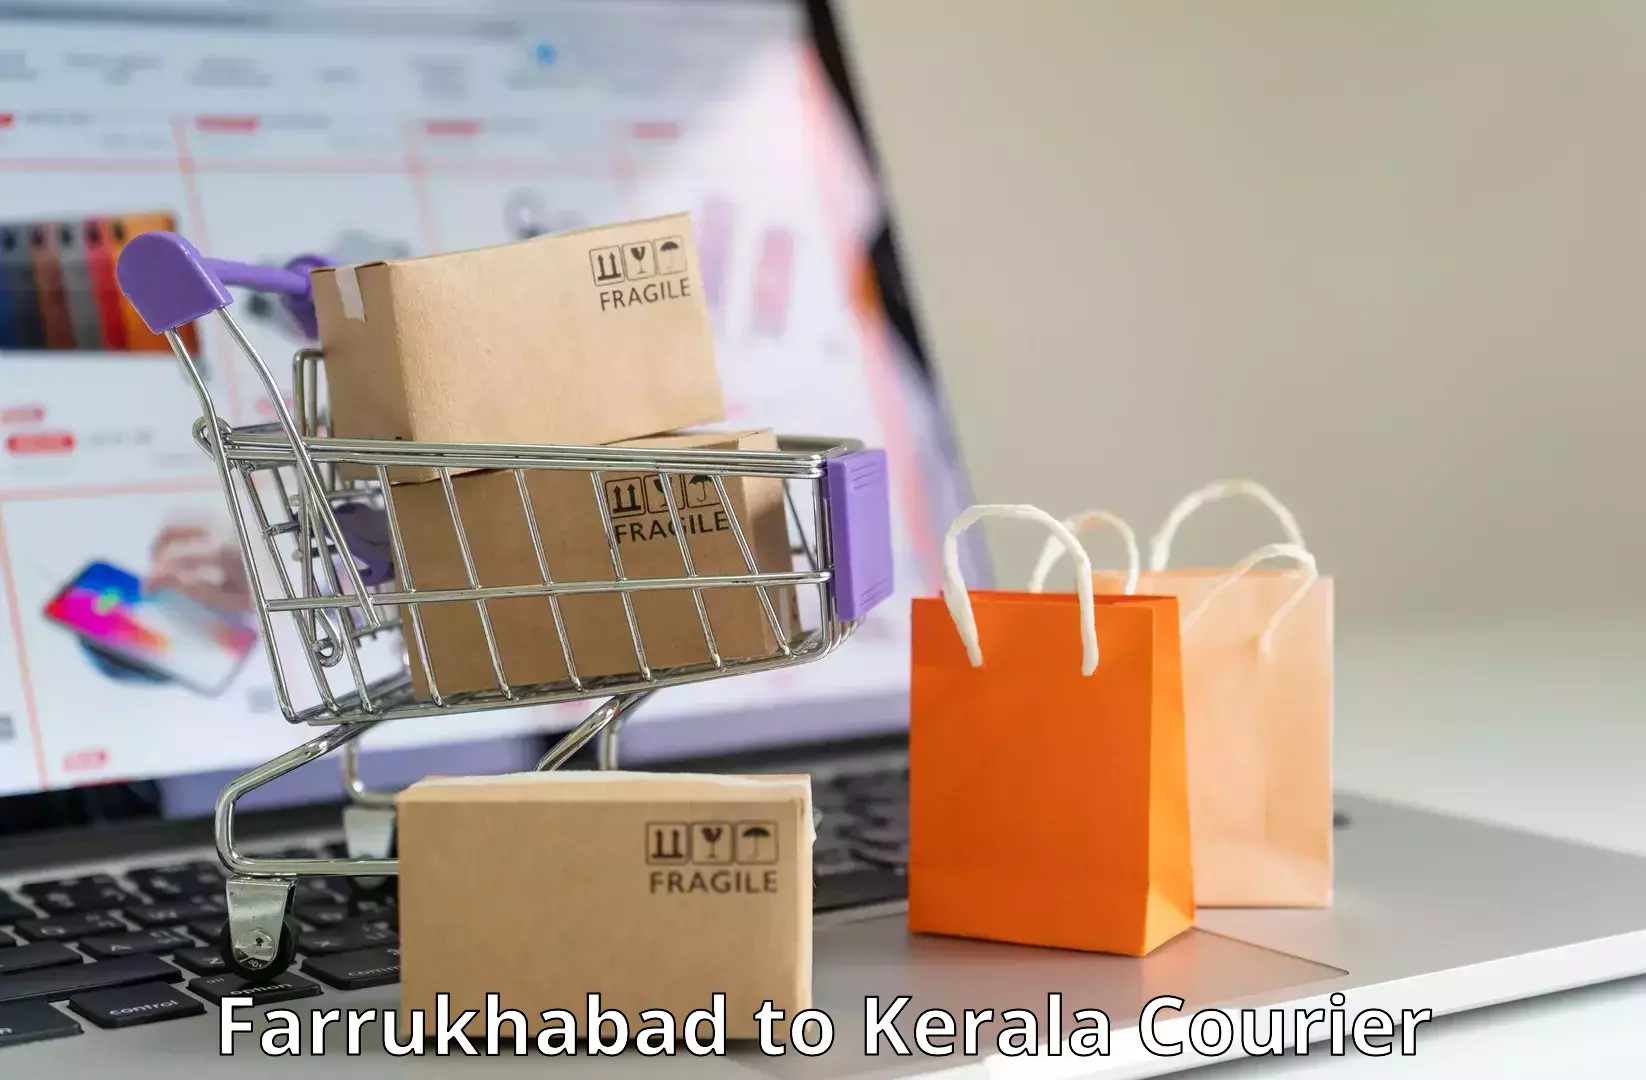 Rural area delivery Farrukhabad to Kasaragod